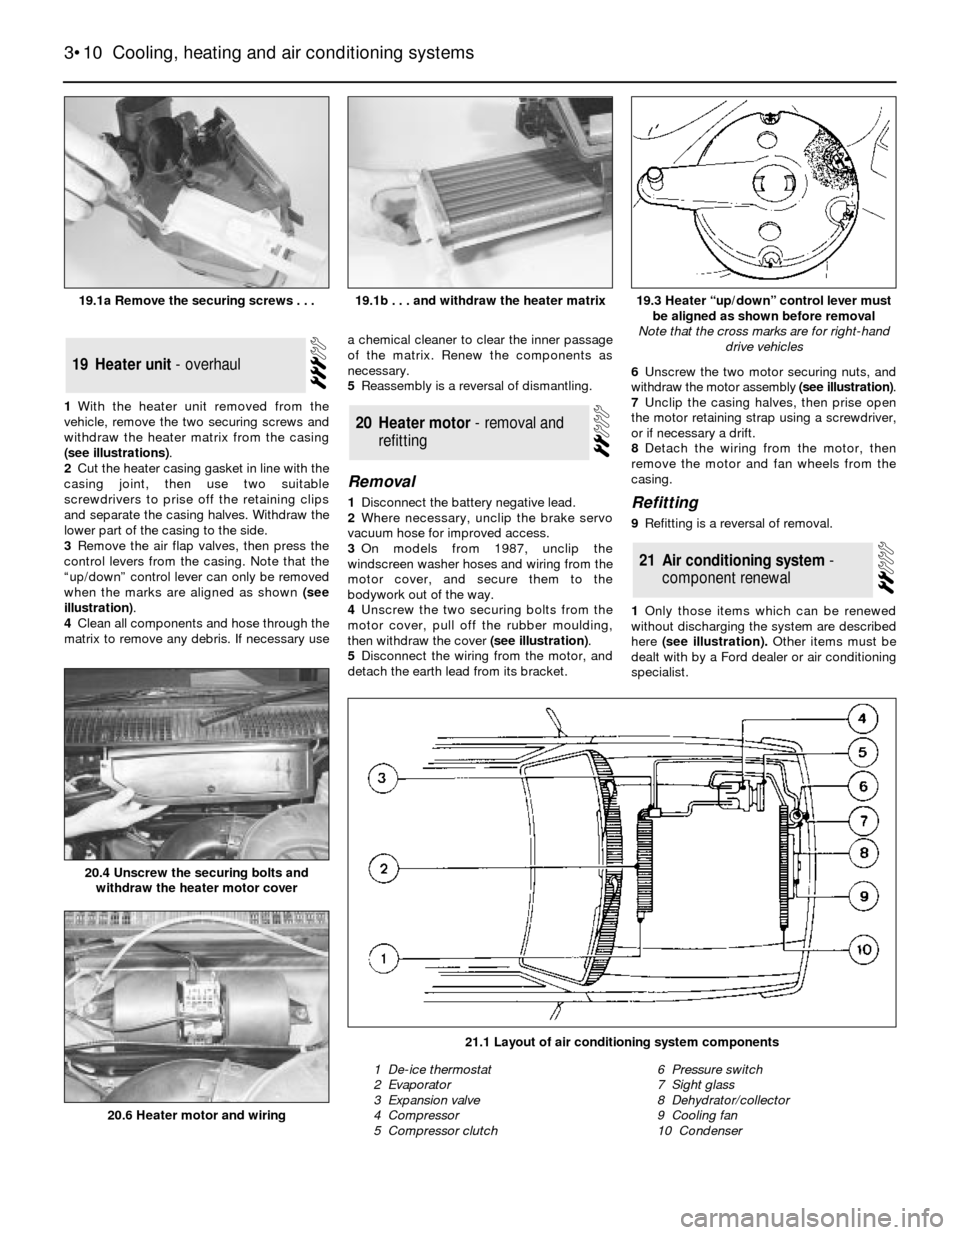 FORD SIERRA 1990 2.G Cooling And Air Conditioning Systems Workshop Manual 1With the heater unit removed from the
vehicle, remove the two securing screws and
withdraw the heater matrix from the casing
(see illustrations).
2Cut the heater casing gasket in line with the
casing